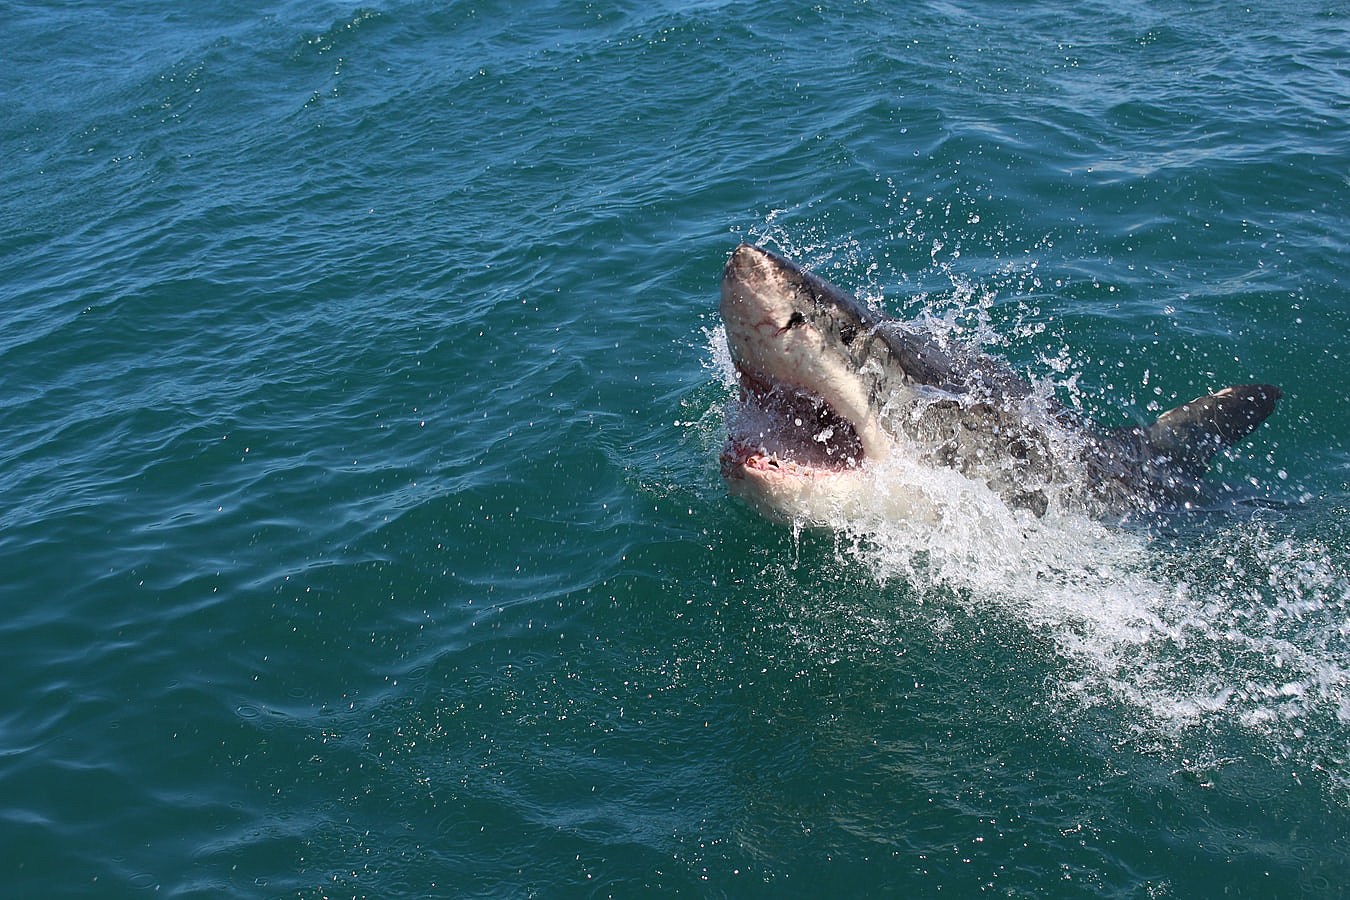 Those aren't 'baby great white sharks' washing up on the Oregon